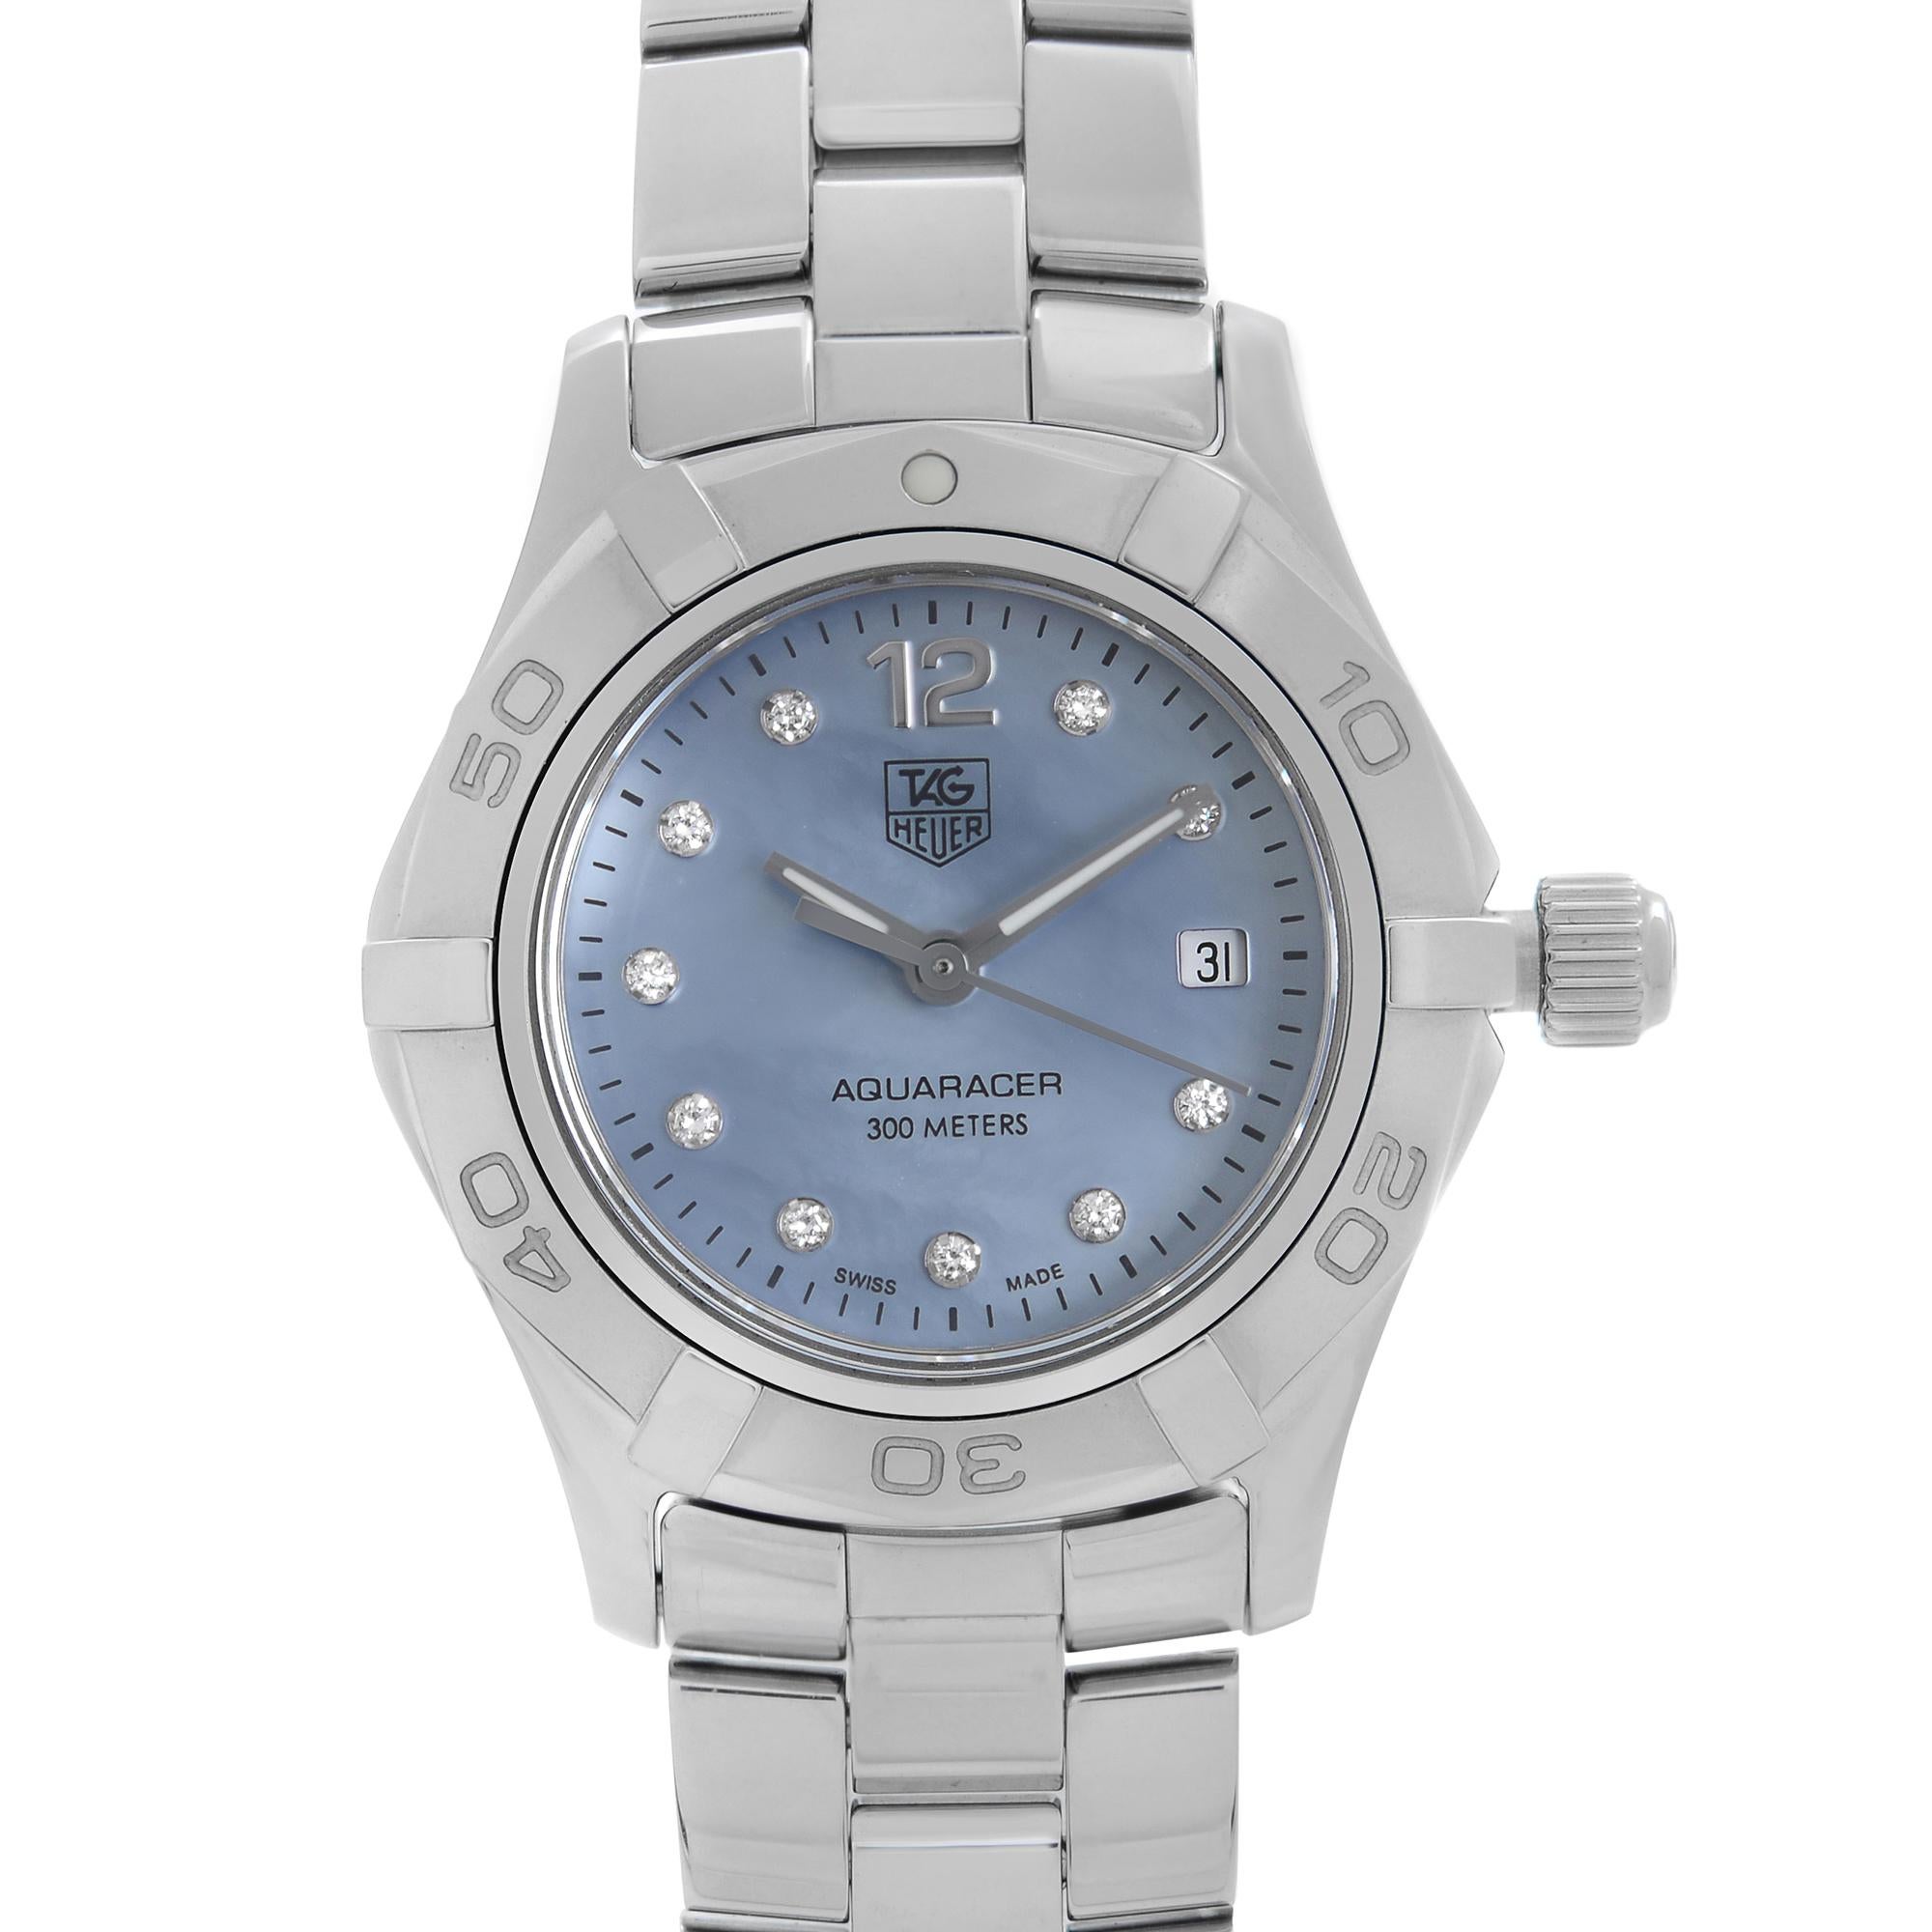 This display model TAG Heuer Aquaracer WAF1419.BA0824 is a beautiful LadieWomen's timepiece that is powered by a quartz movement which is cased in a stainless steel case. It has a round shape face, date, diamonds dial, and has hand diamonds style